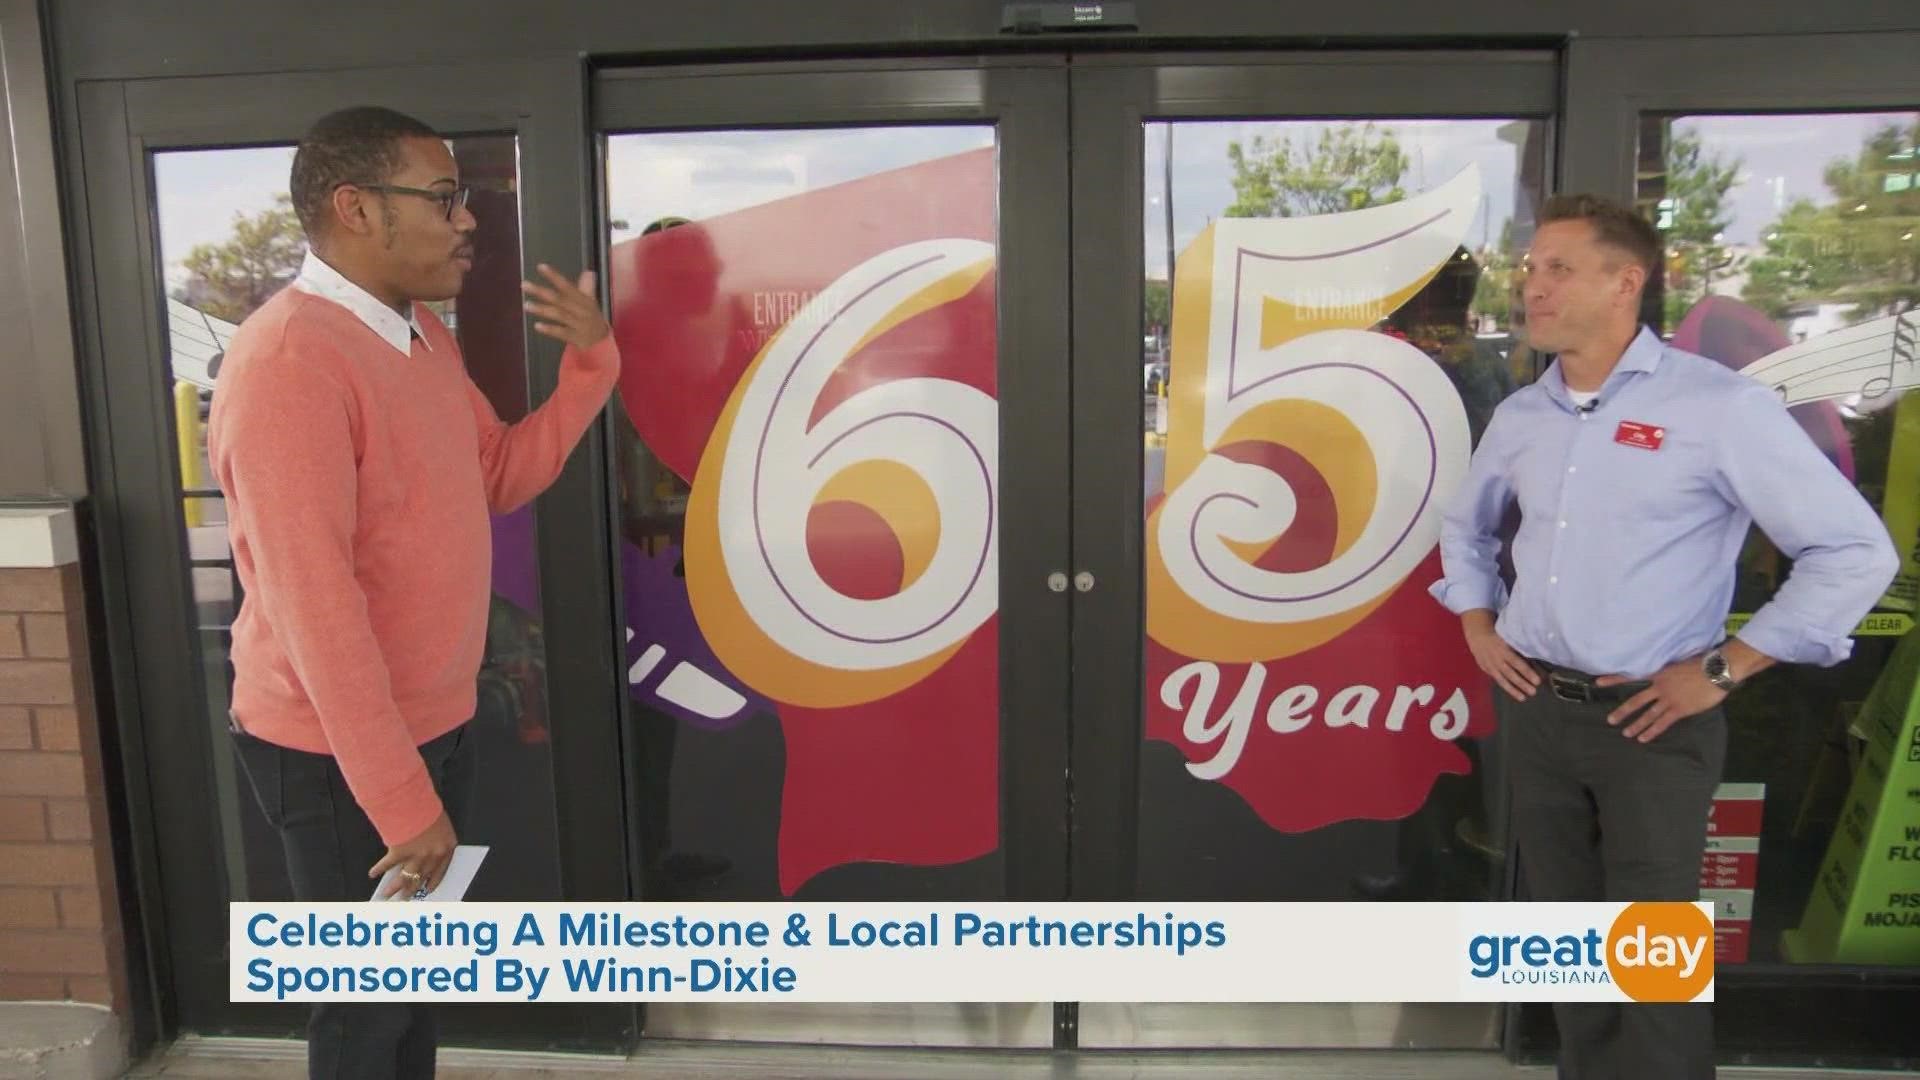 Winn-Dixie shared how they plan on celebrating 65 years of business and highlighted some local partnerships.